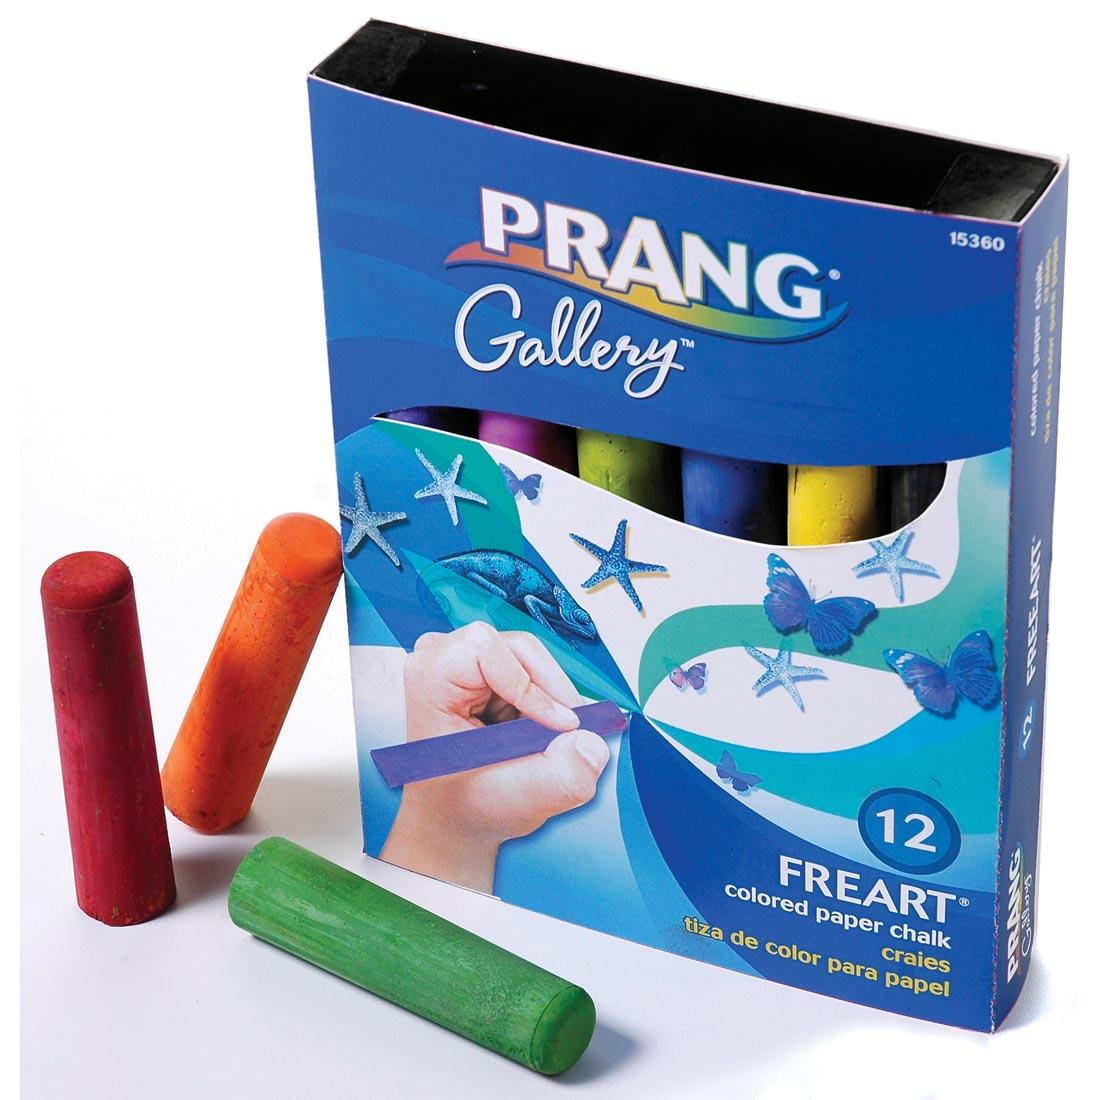 Prang Freart Colored Paper Chalk with 3 Sticks Outside the Box